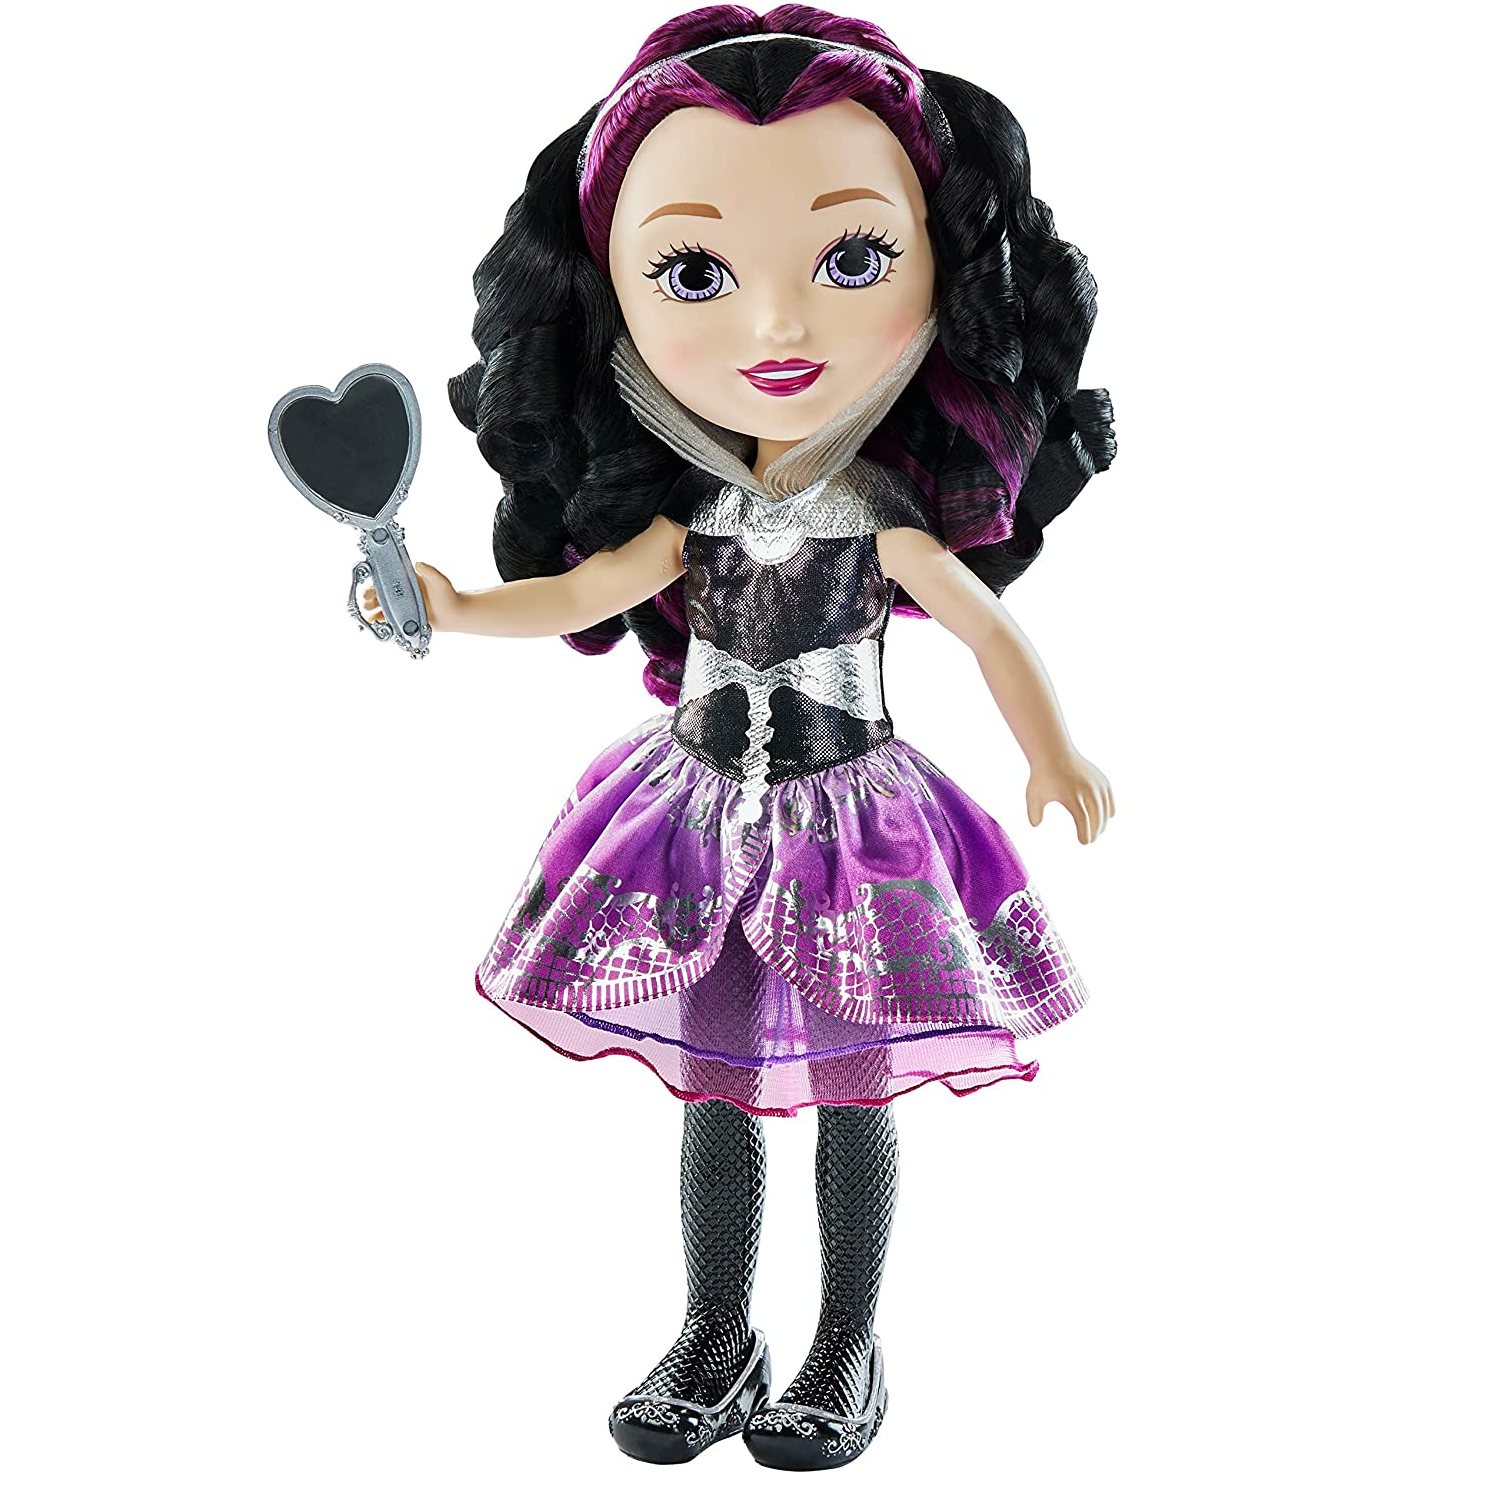 Raven Queen - Ever After High